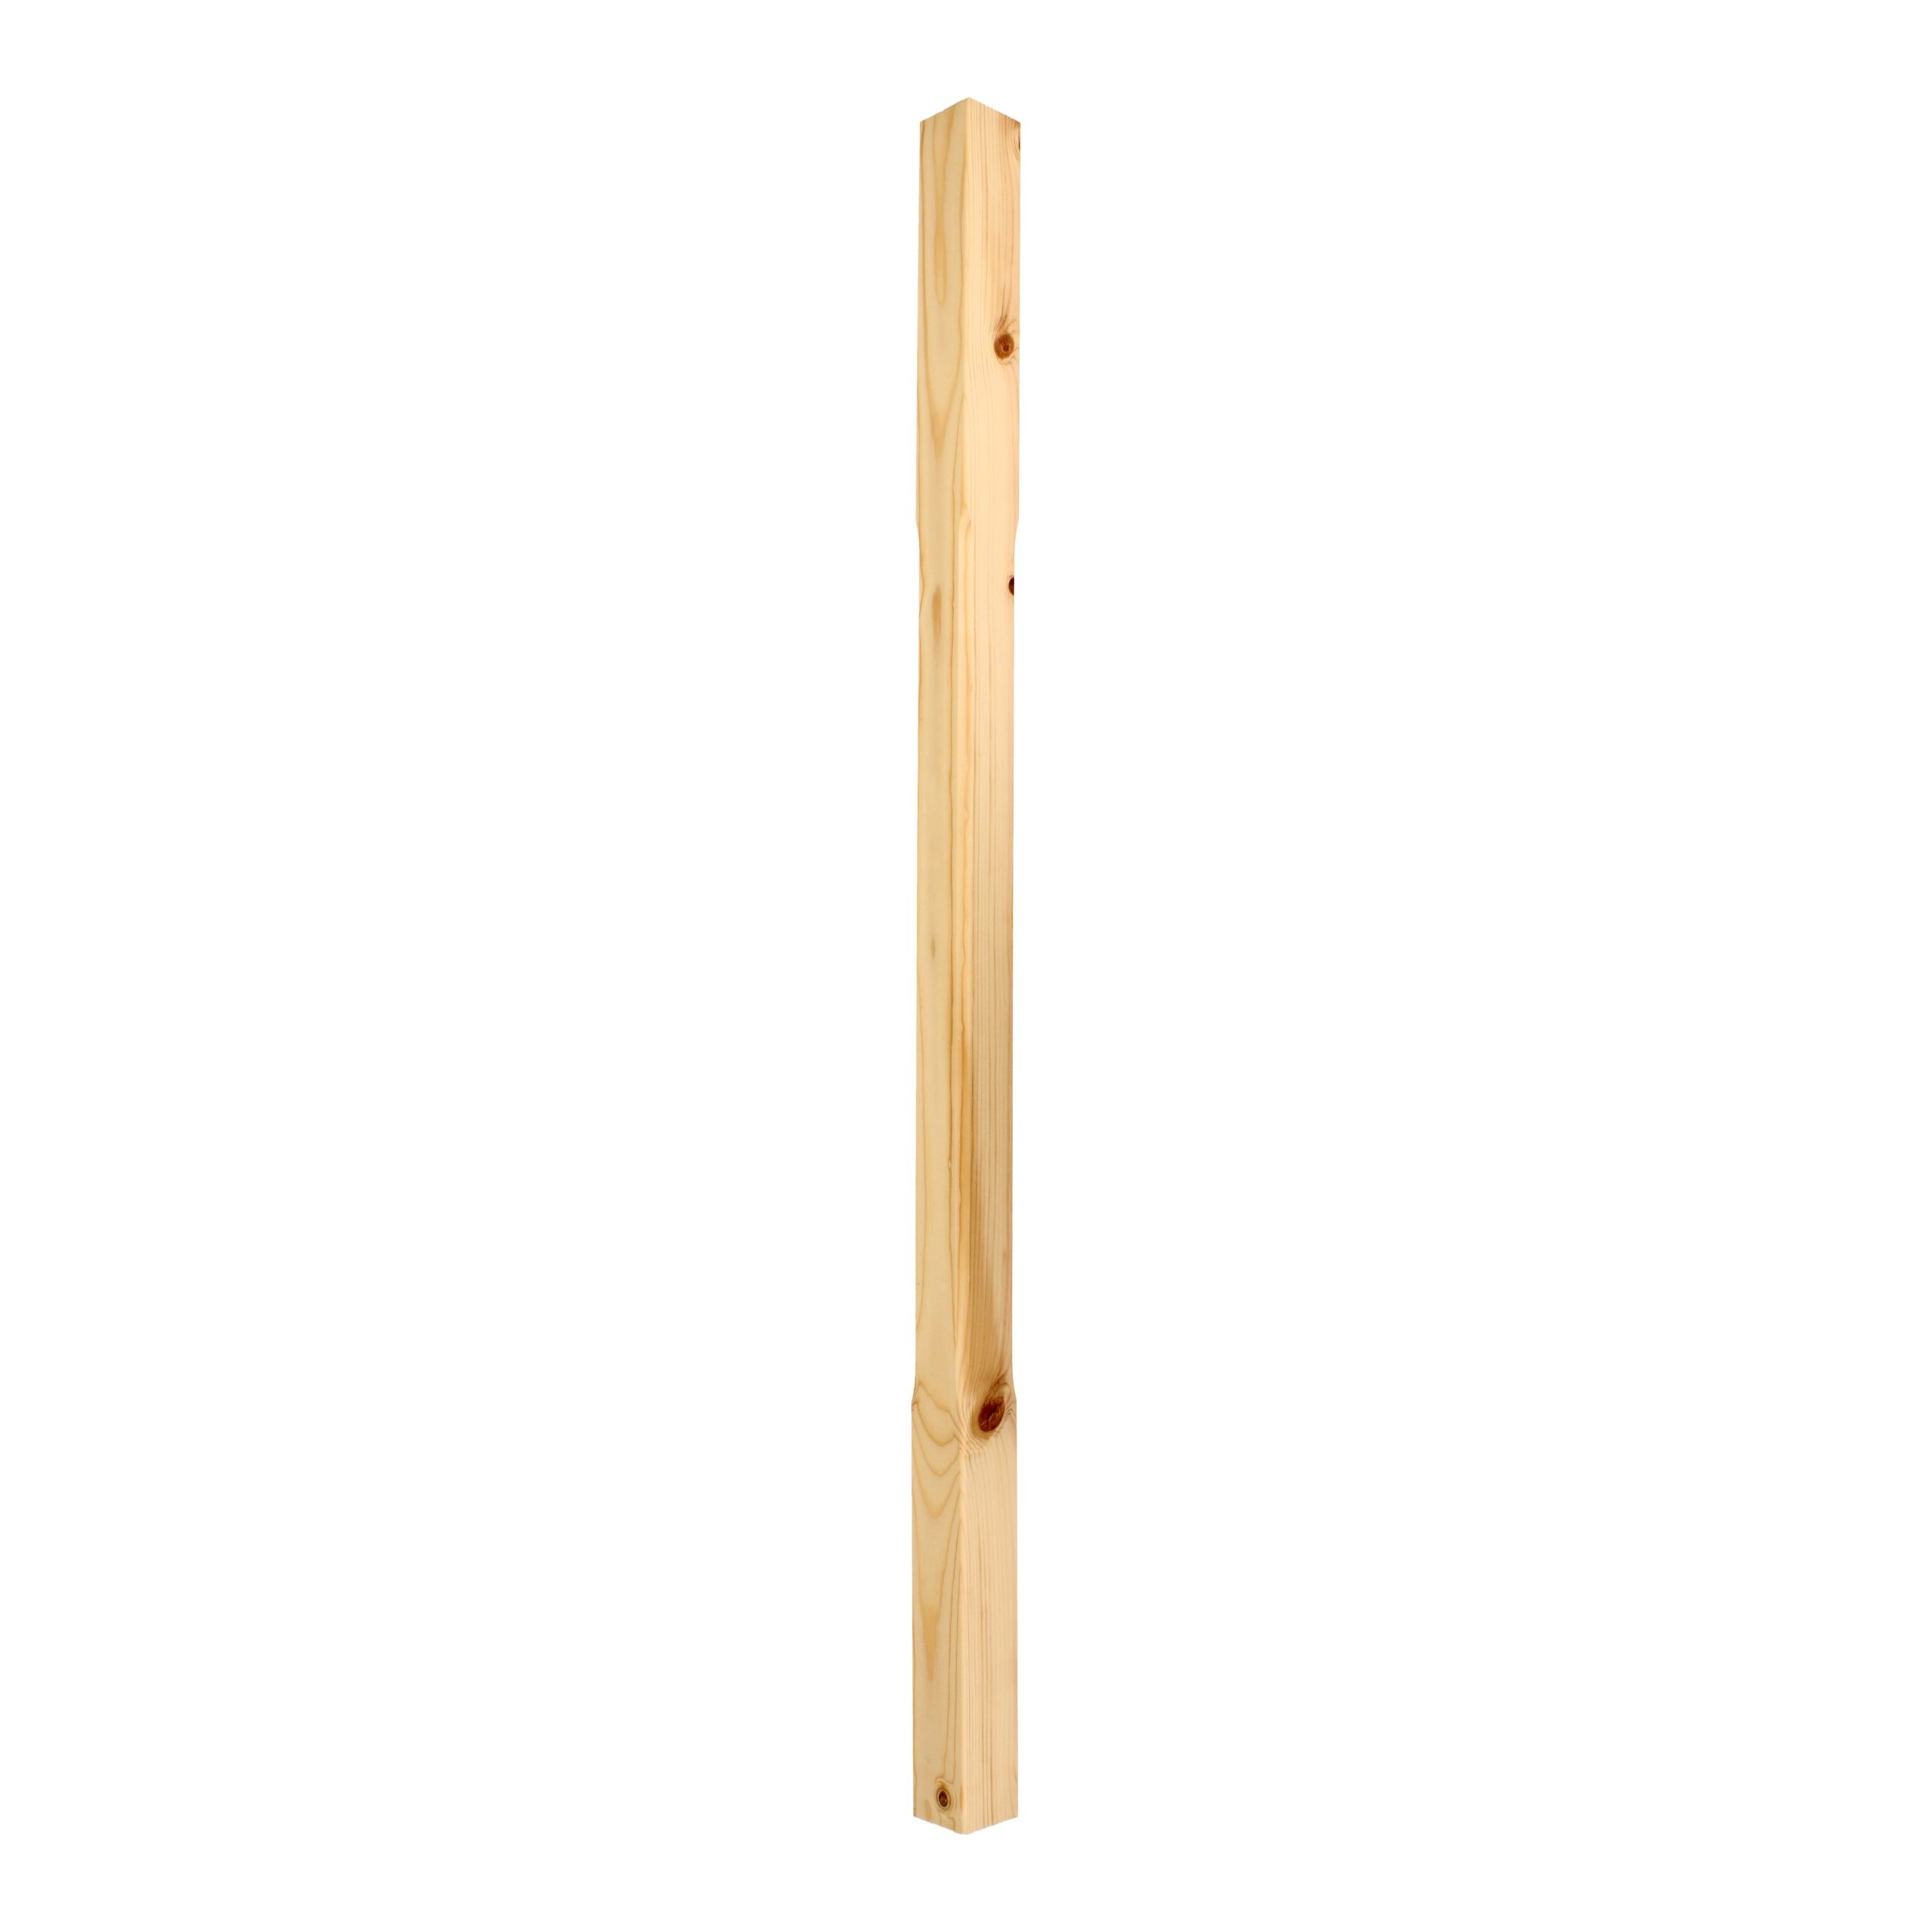 Pine-Chamfered-41mm x 900 - Wooden staircase spindle.